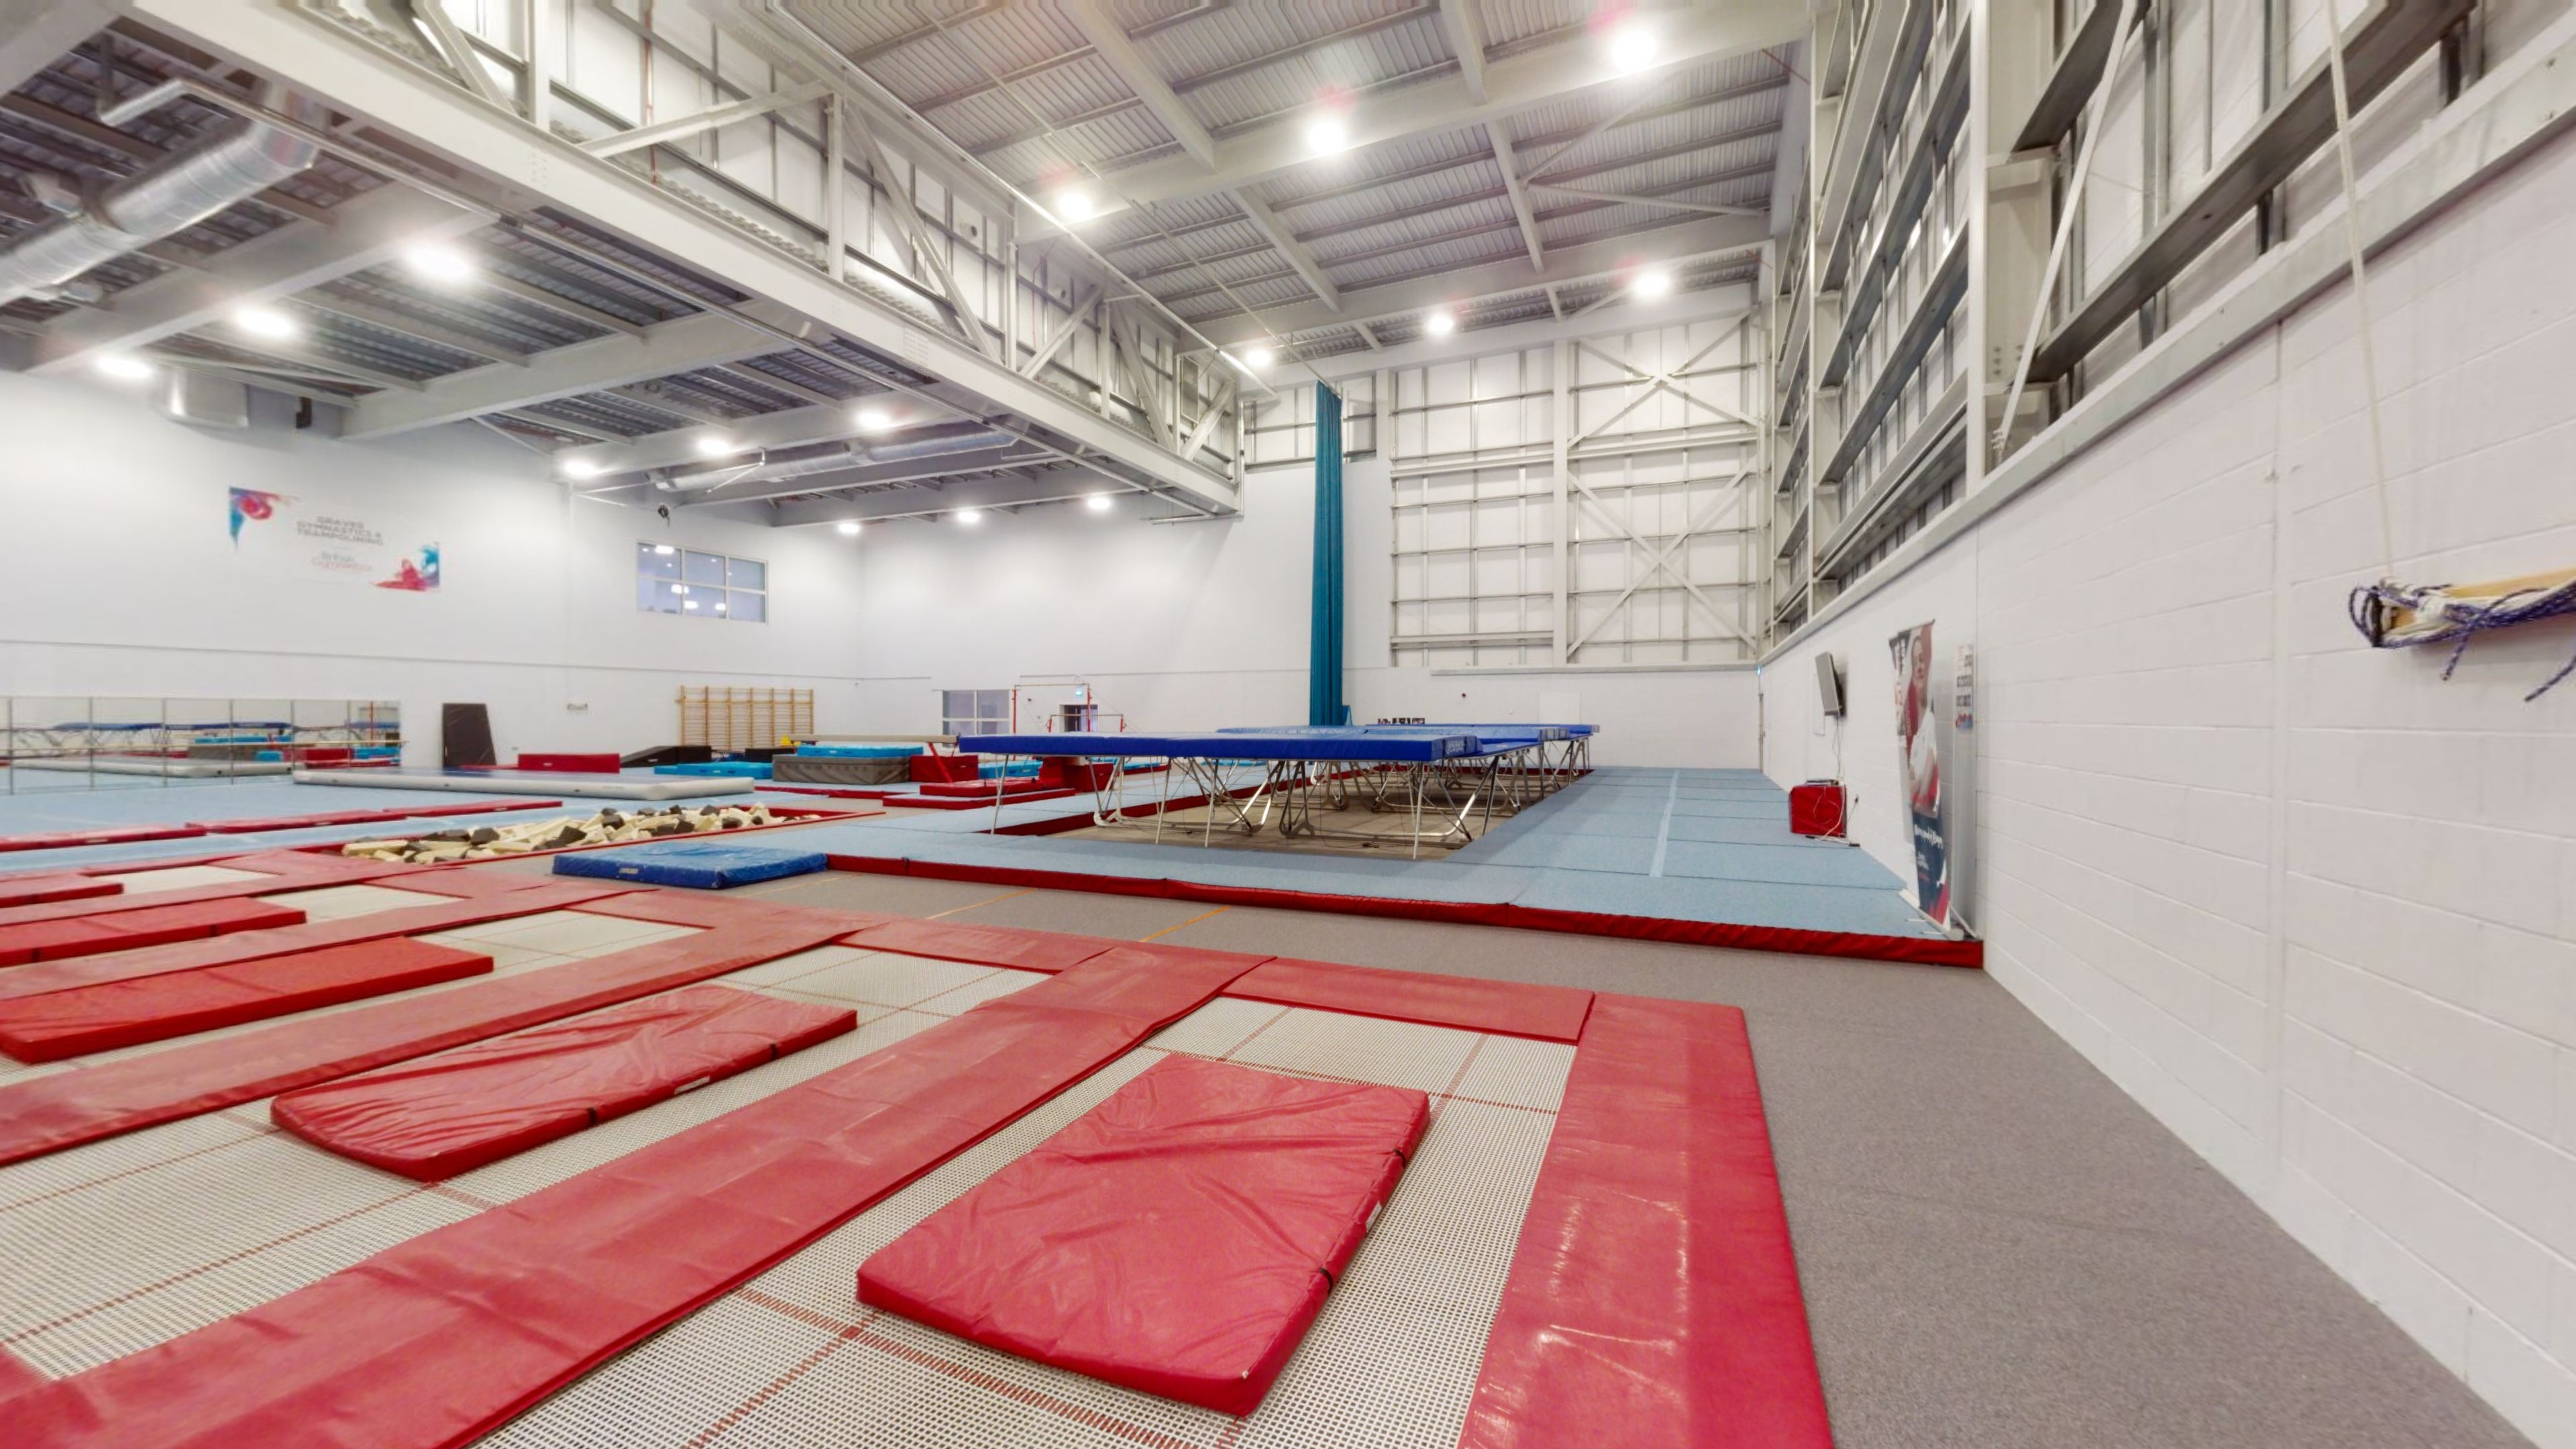 Trampolining at Graves Health and Sports Centre Graves Health and Sports Centre Sheffield 01142 839900